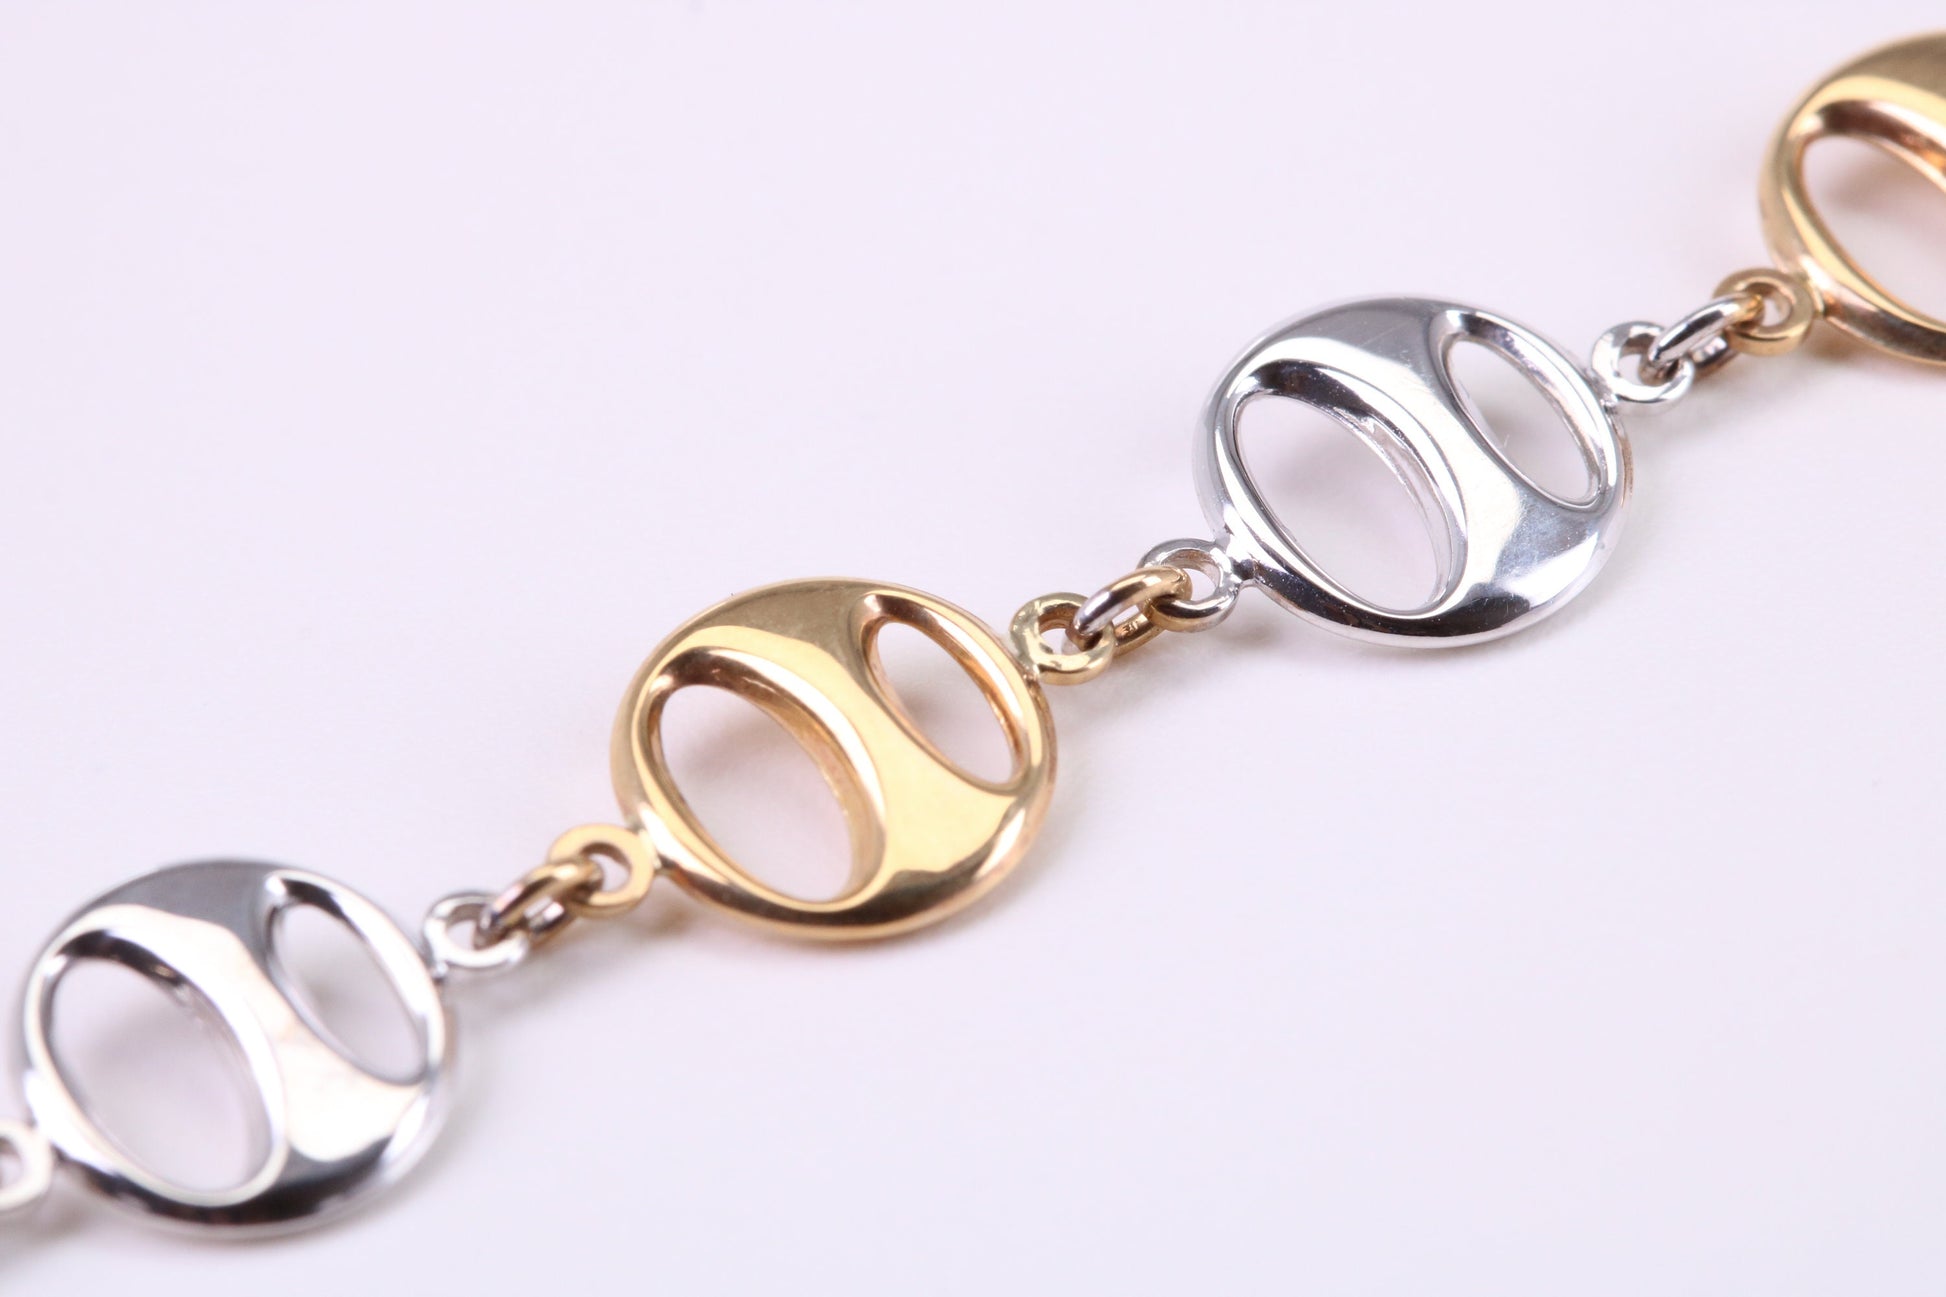 Round Patterned Link Bracelet, Made From Solid Yellow and White Gold, British Hallmarked, Luxury Gift Boxed